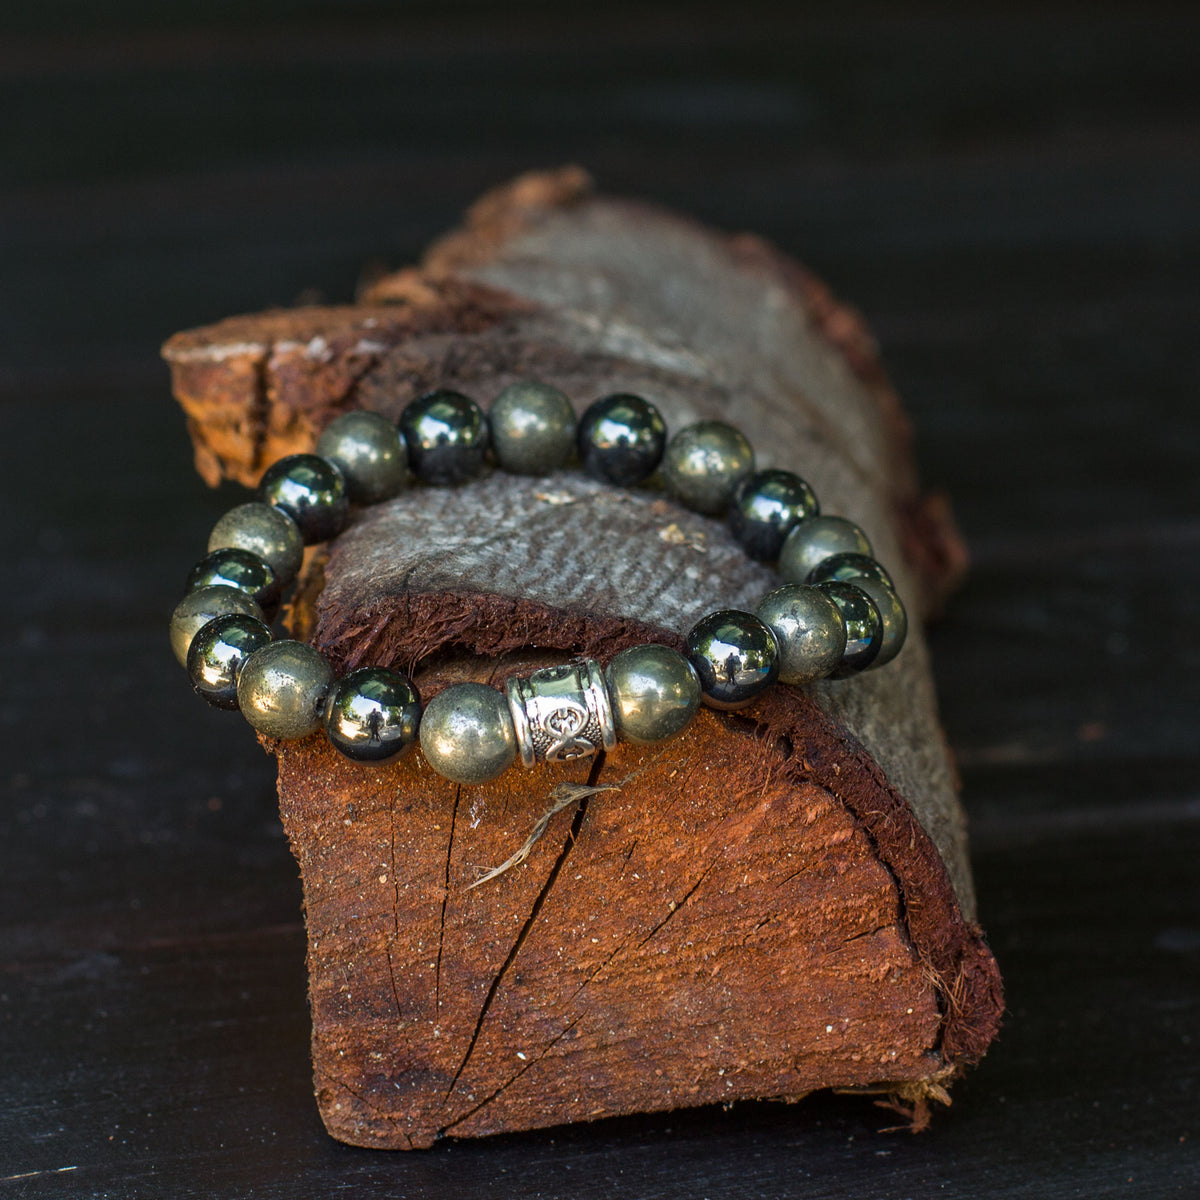 The Spark Bracelet 10mm - Pyrite gets its name from the Greek word “pyr” meaning fire and is also known as fool’s gold due to its golden colour. It sparks when it comes into contact with steel. Pyrite is a protective stone that can shield against bad energy and keeps evil spirits at bay. It has an energetic and positive vibe.